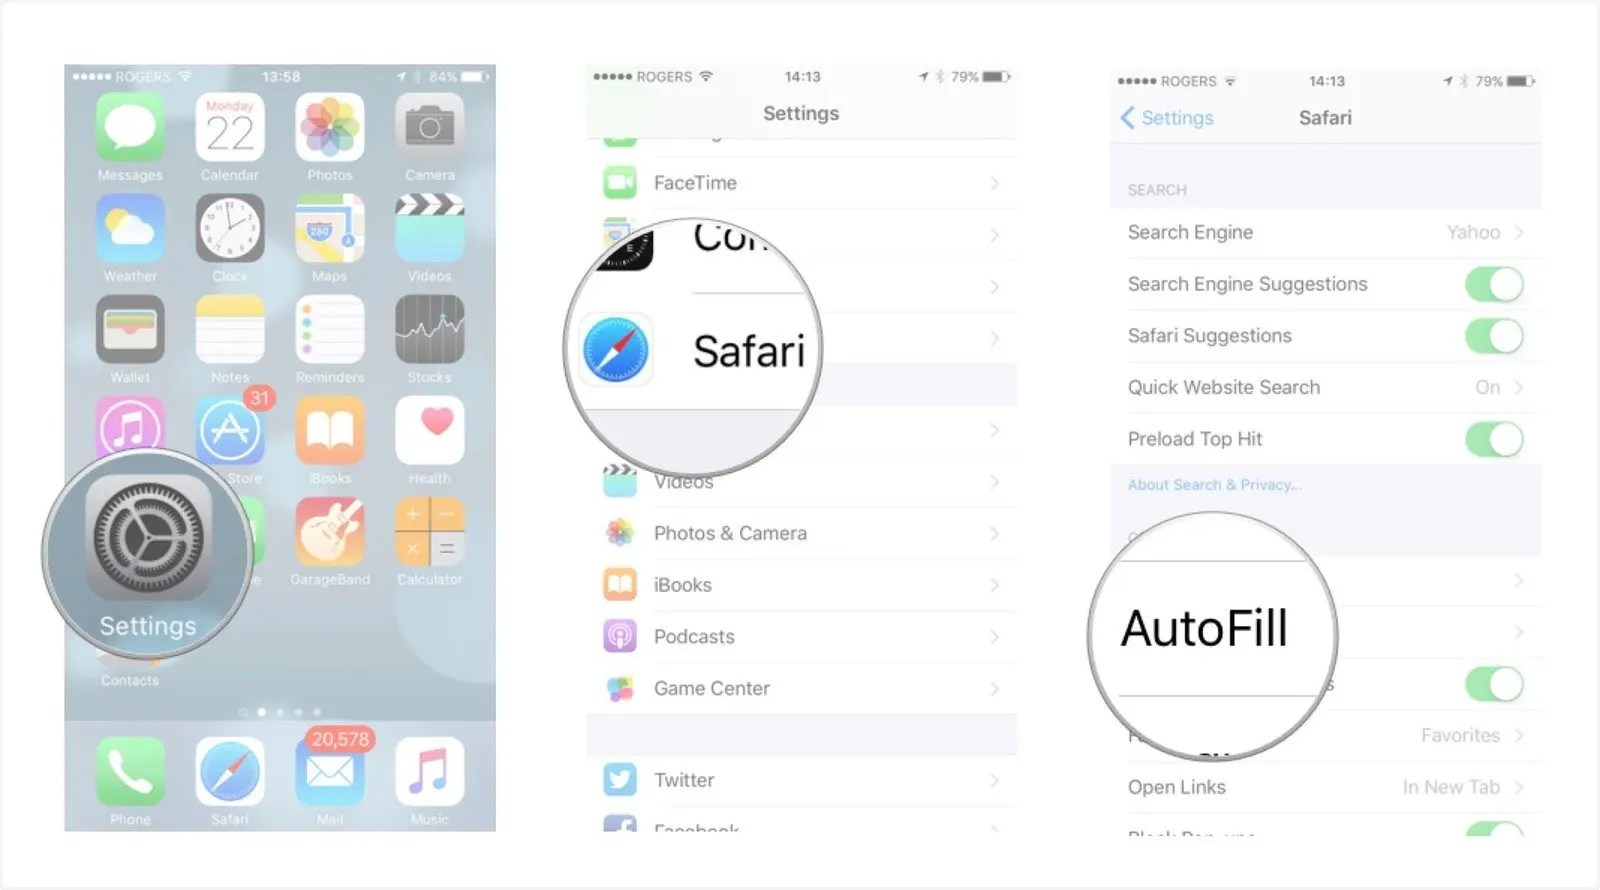 How to View Passwords in iCloud Keychain on iPhone, iPad, or Mac